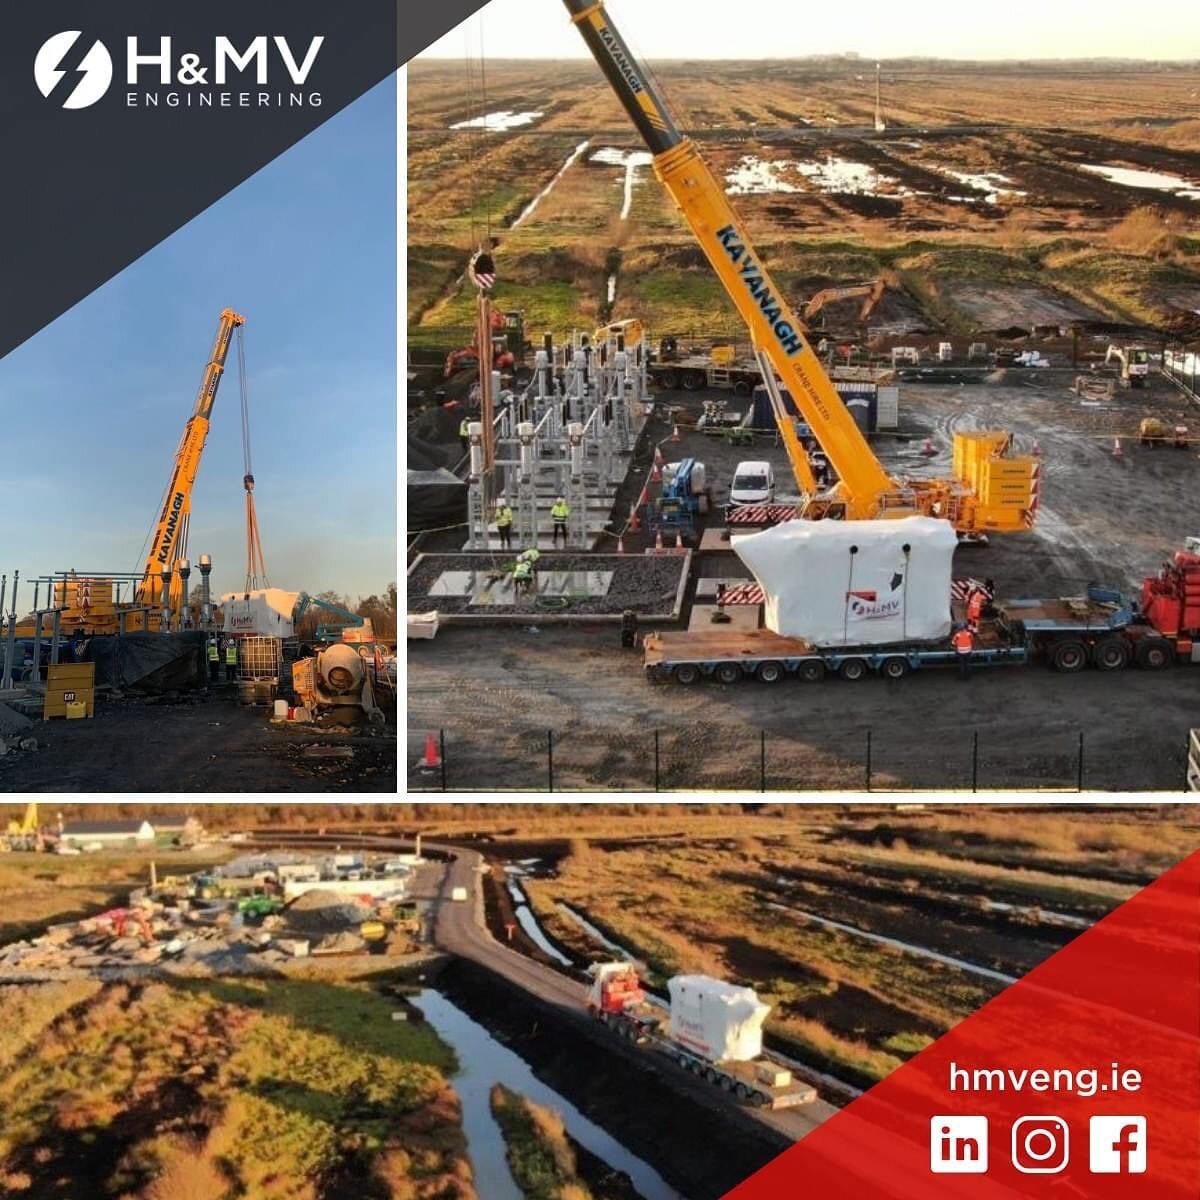 In Ireland, transformer delivery took place shortly before the New Year at one of H&amp;MV Engineering&rsquo;s windfarm projects in the midlands. The windfarm will consist of 21 turbines and a 110/33 kV substation with an export capacity of 75 MW. Ou